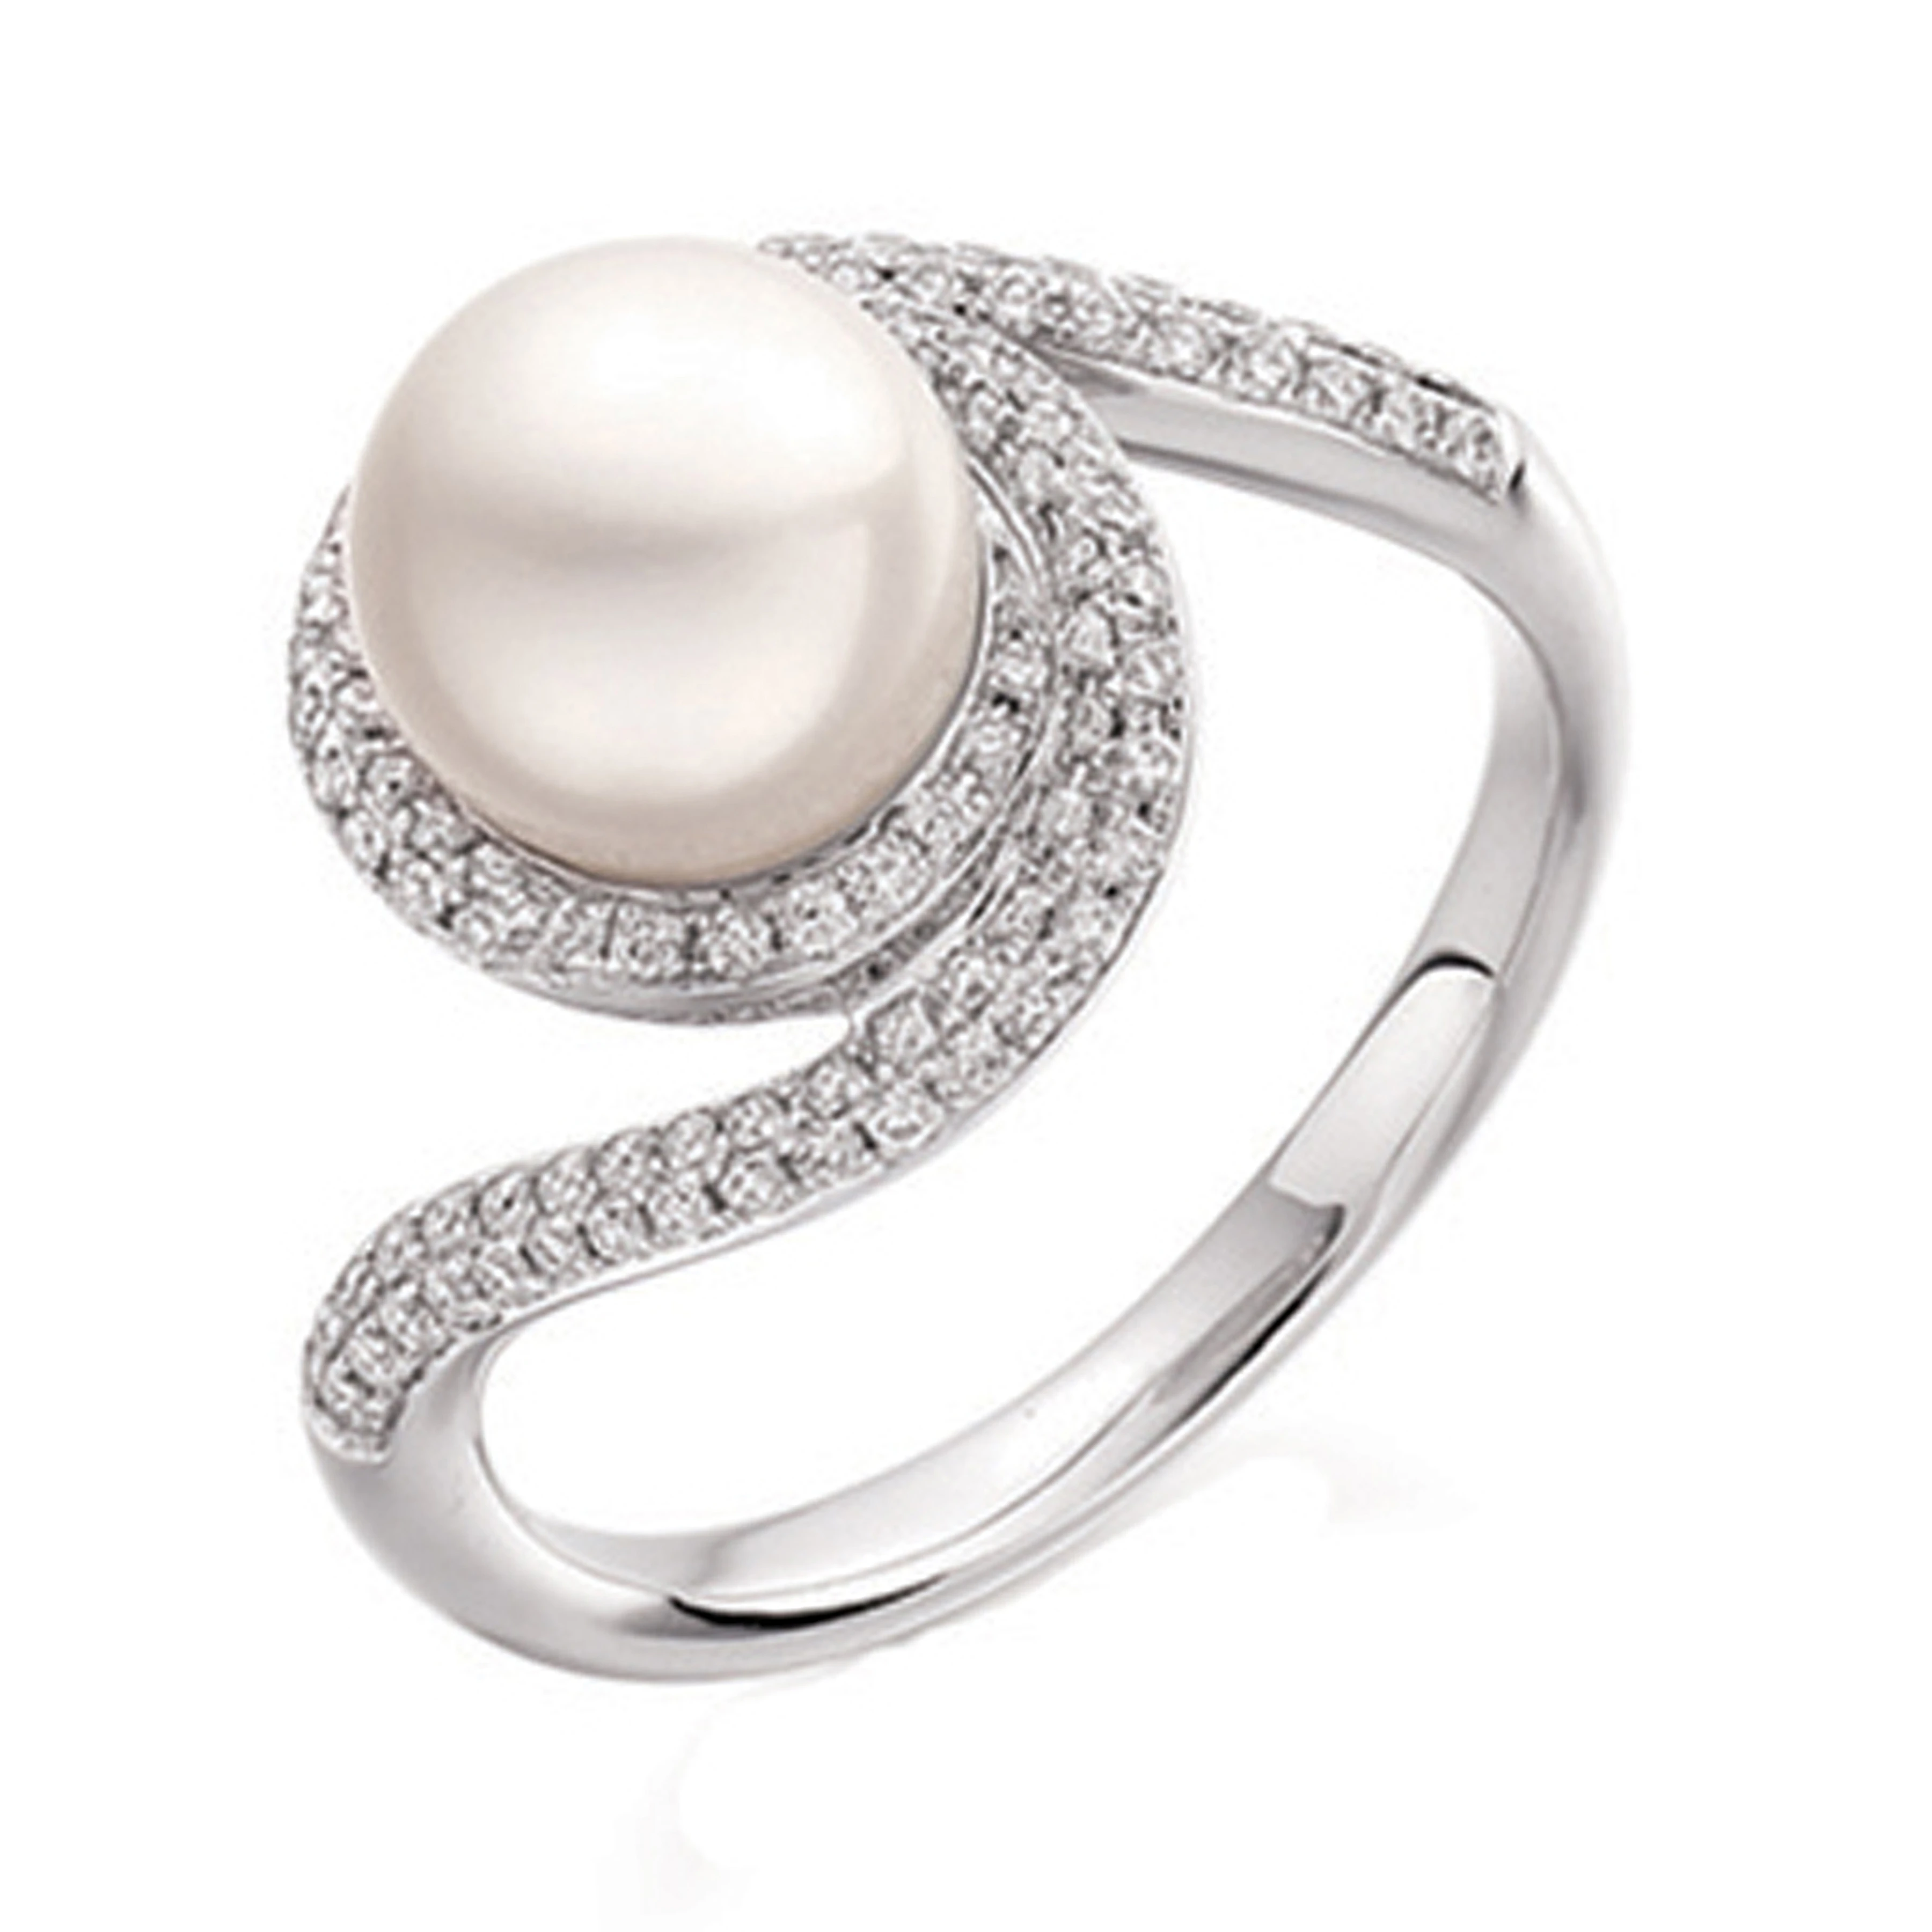 7mm Round White Pearl Multiple Stones Diamond And Pearl Ring